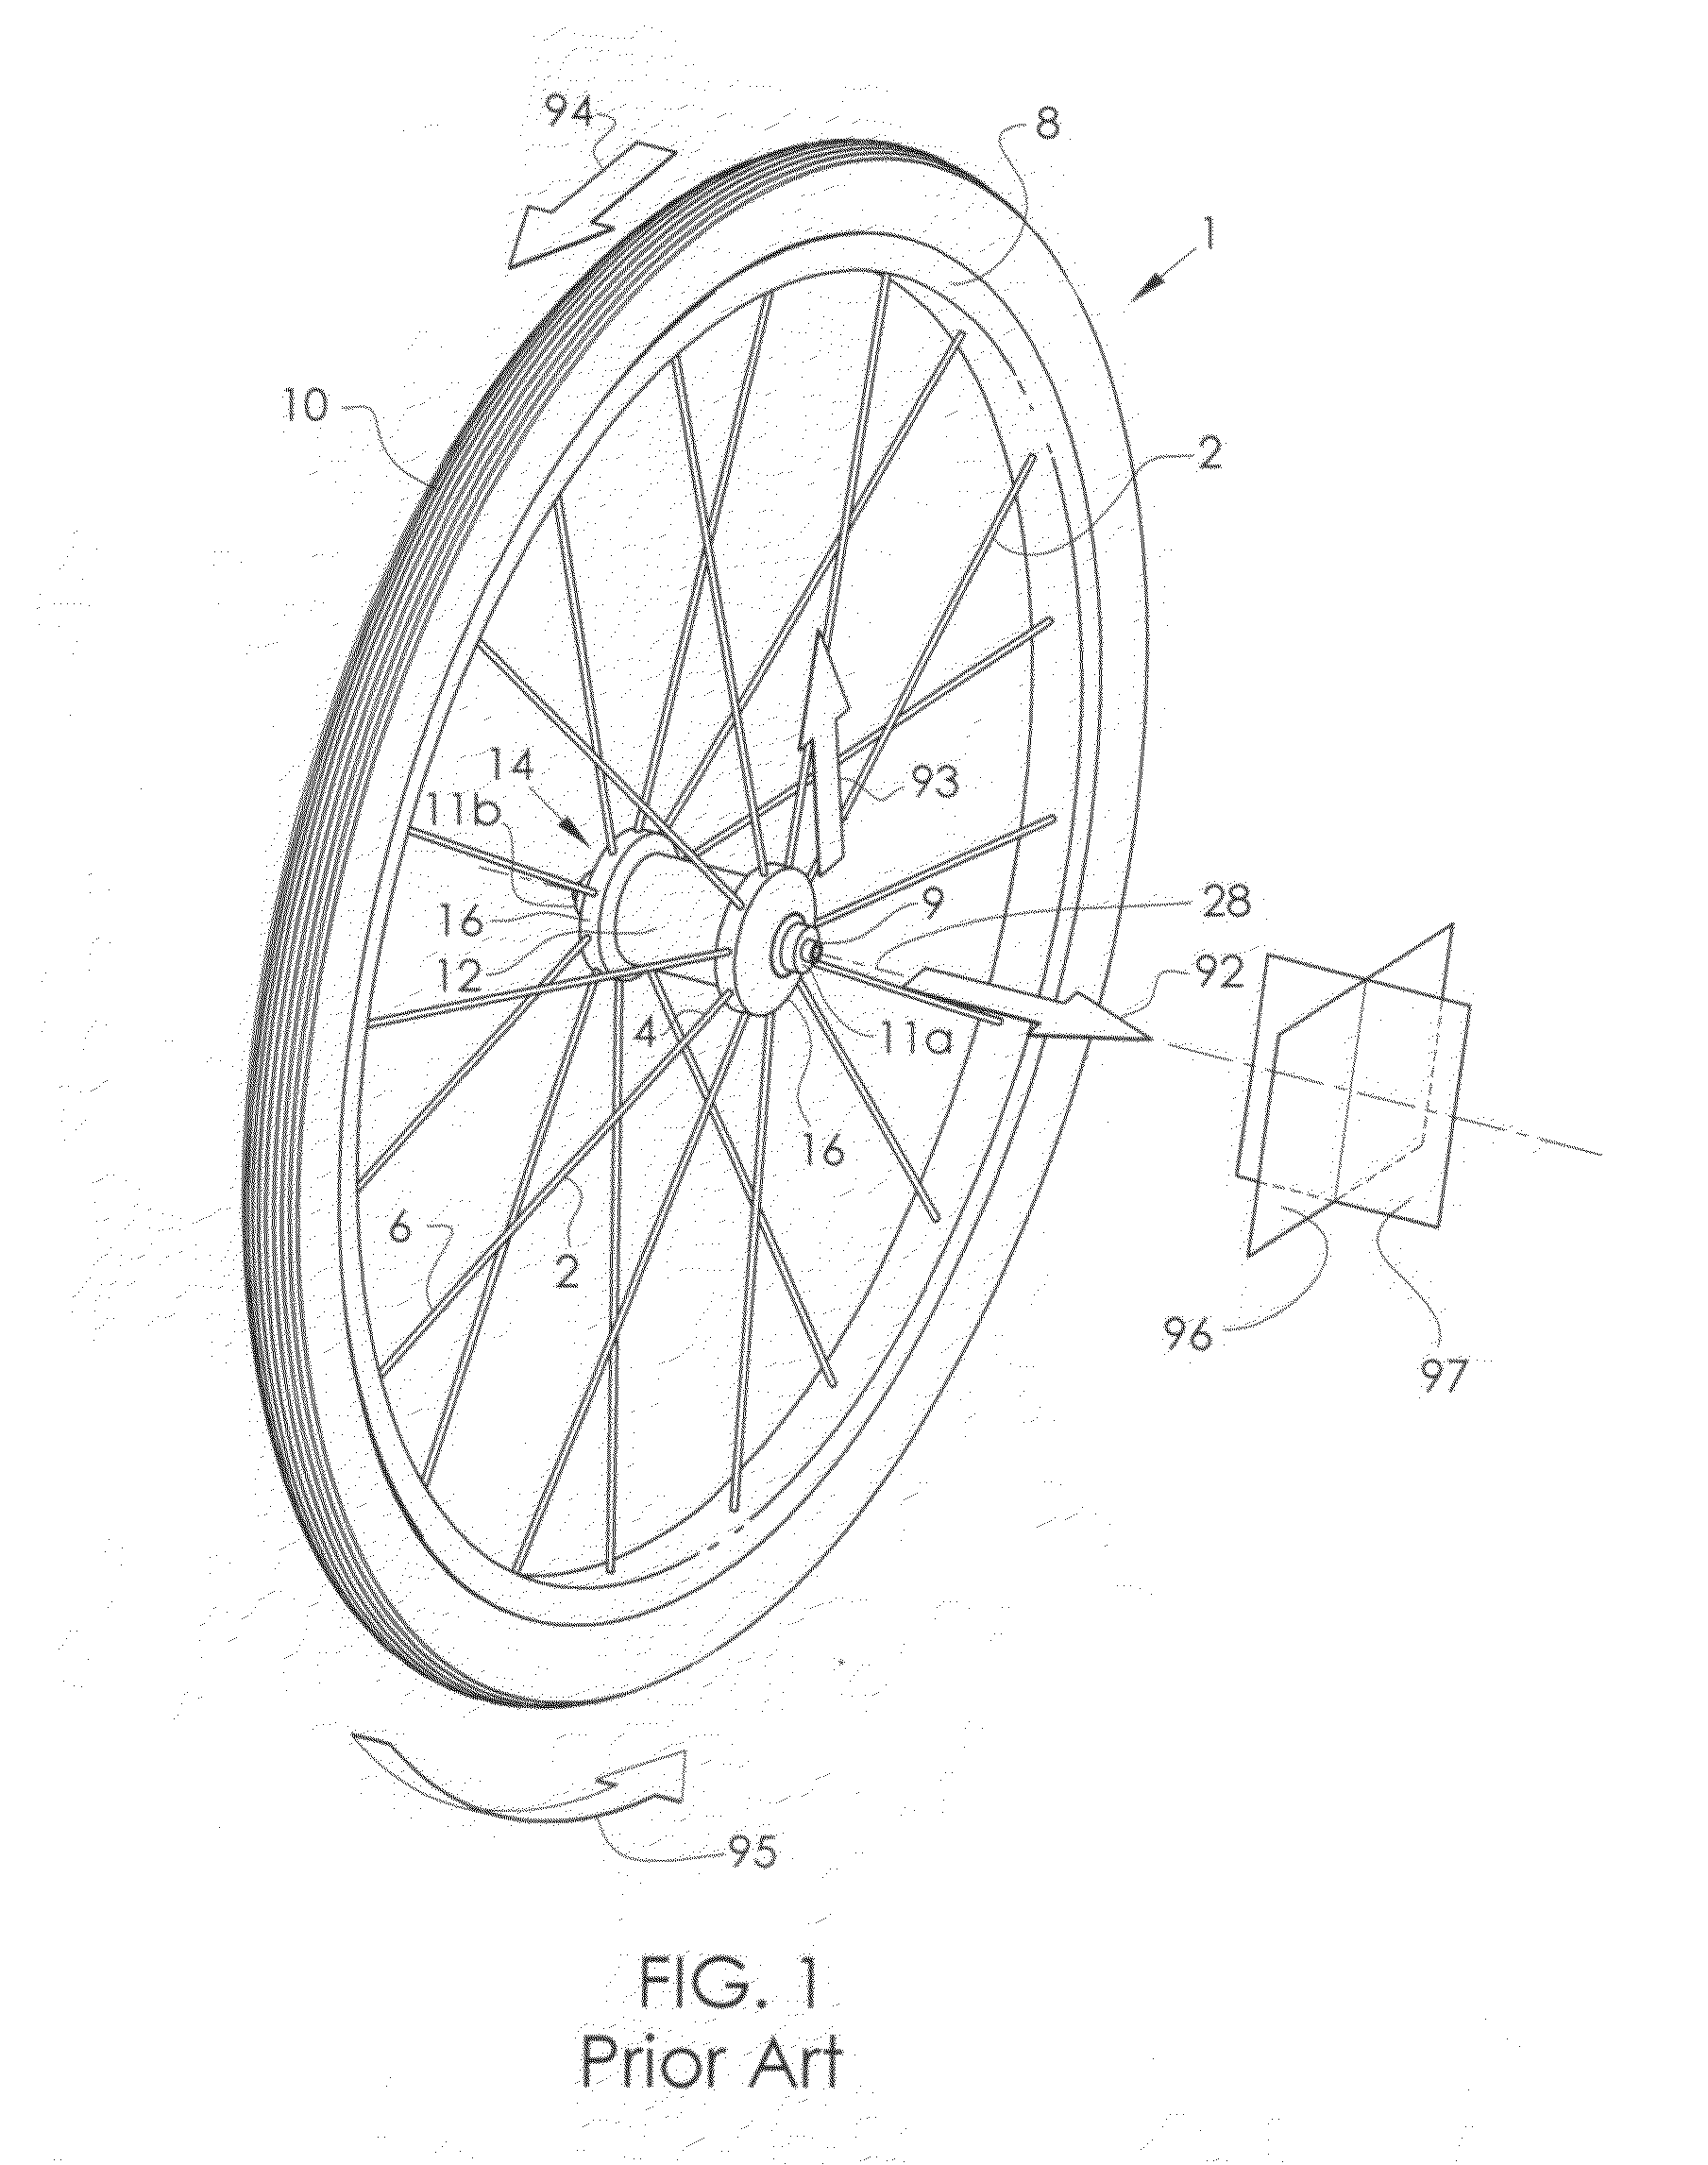 Connecting system for tensile elements